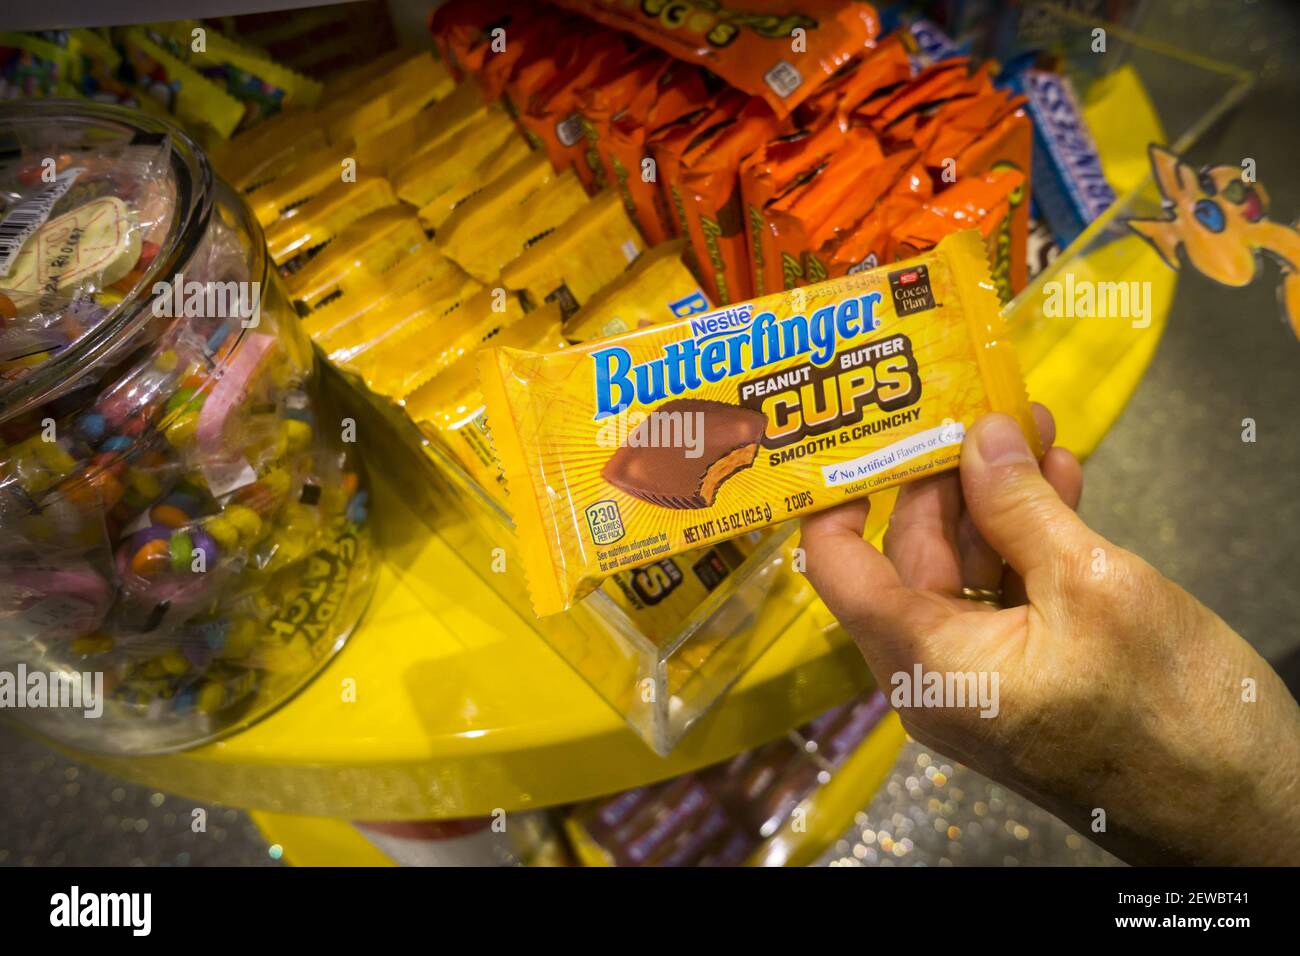 A shopper chooses a Nestlé's brand Butterfinger candy in a store in New York on Tuesday, September 5, 2017. Nestlé is reported to be very near in picking the buyer for its U.S. chocolate business with Ferrero, the maker of Nutella, reported as front-runner. (Photo by Richard B. Levine) Stock Photo